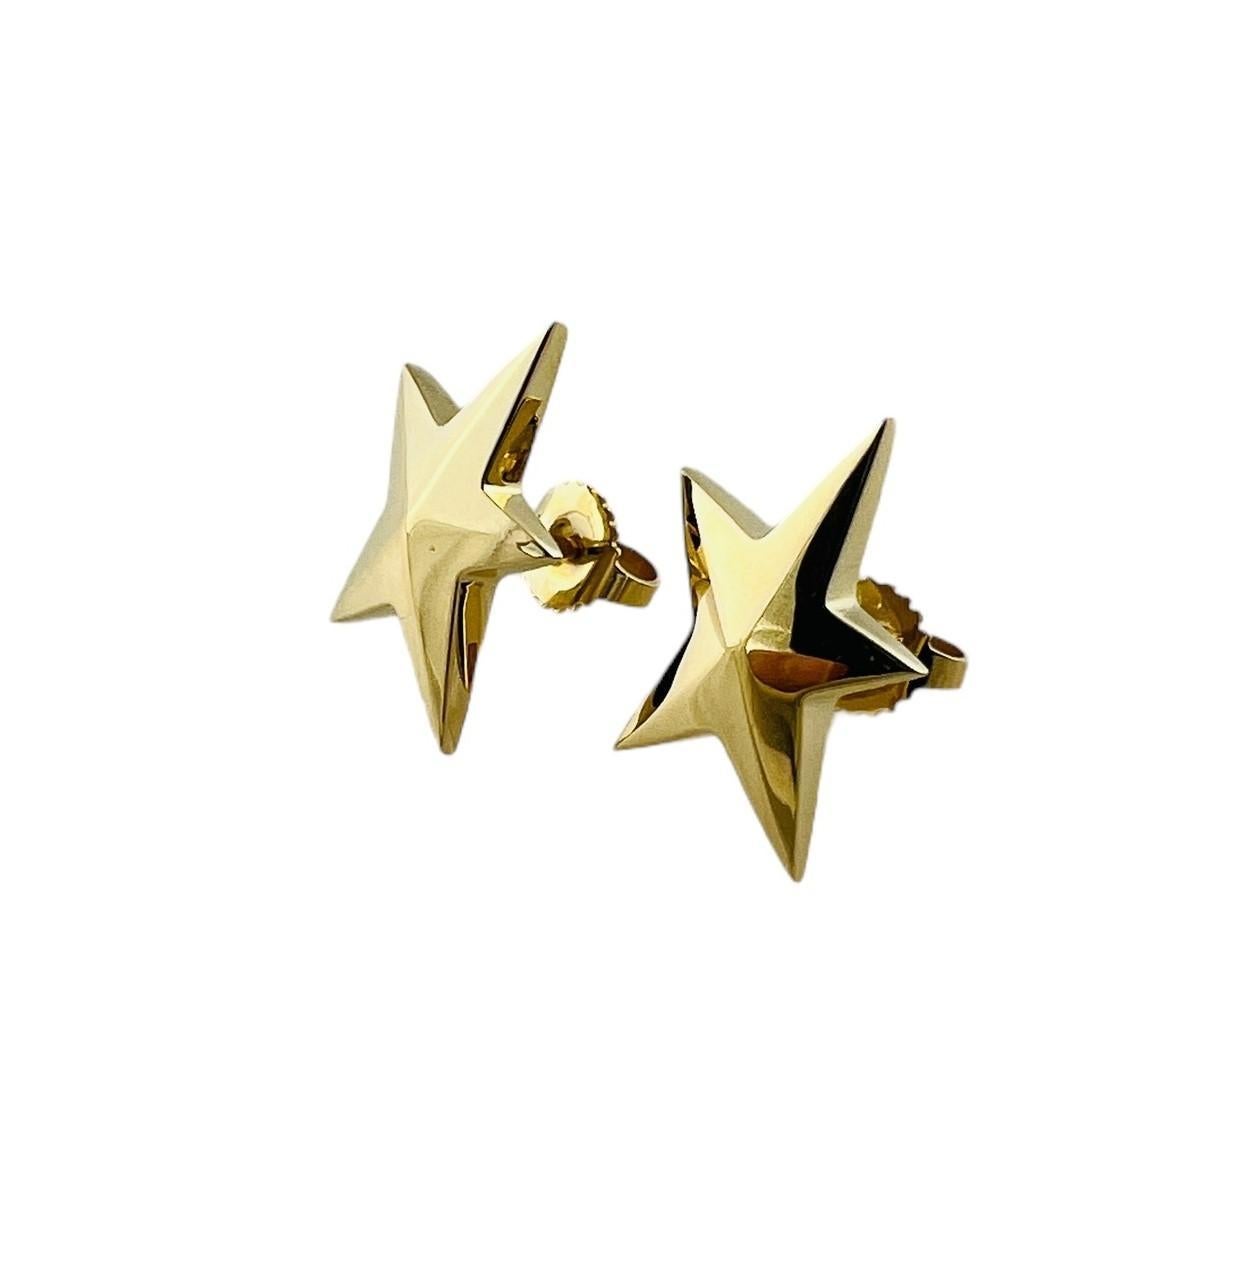 Vintage Tiffany & Co. 18K Yellow Gold Star Earrings 

circa 1980's

These abstract gold star earrings by Tiffany & Co. are set in 18K yellow gold

Earrings are approx. 17 mm in diameter and 14mm from end to end'

Stamped Tiffany & Co. 750

Earrings